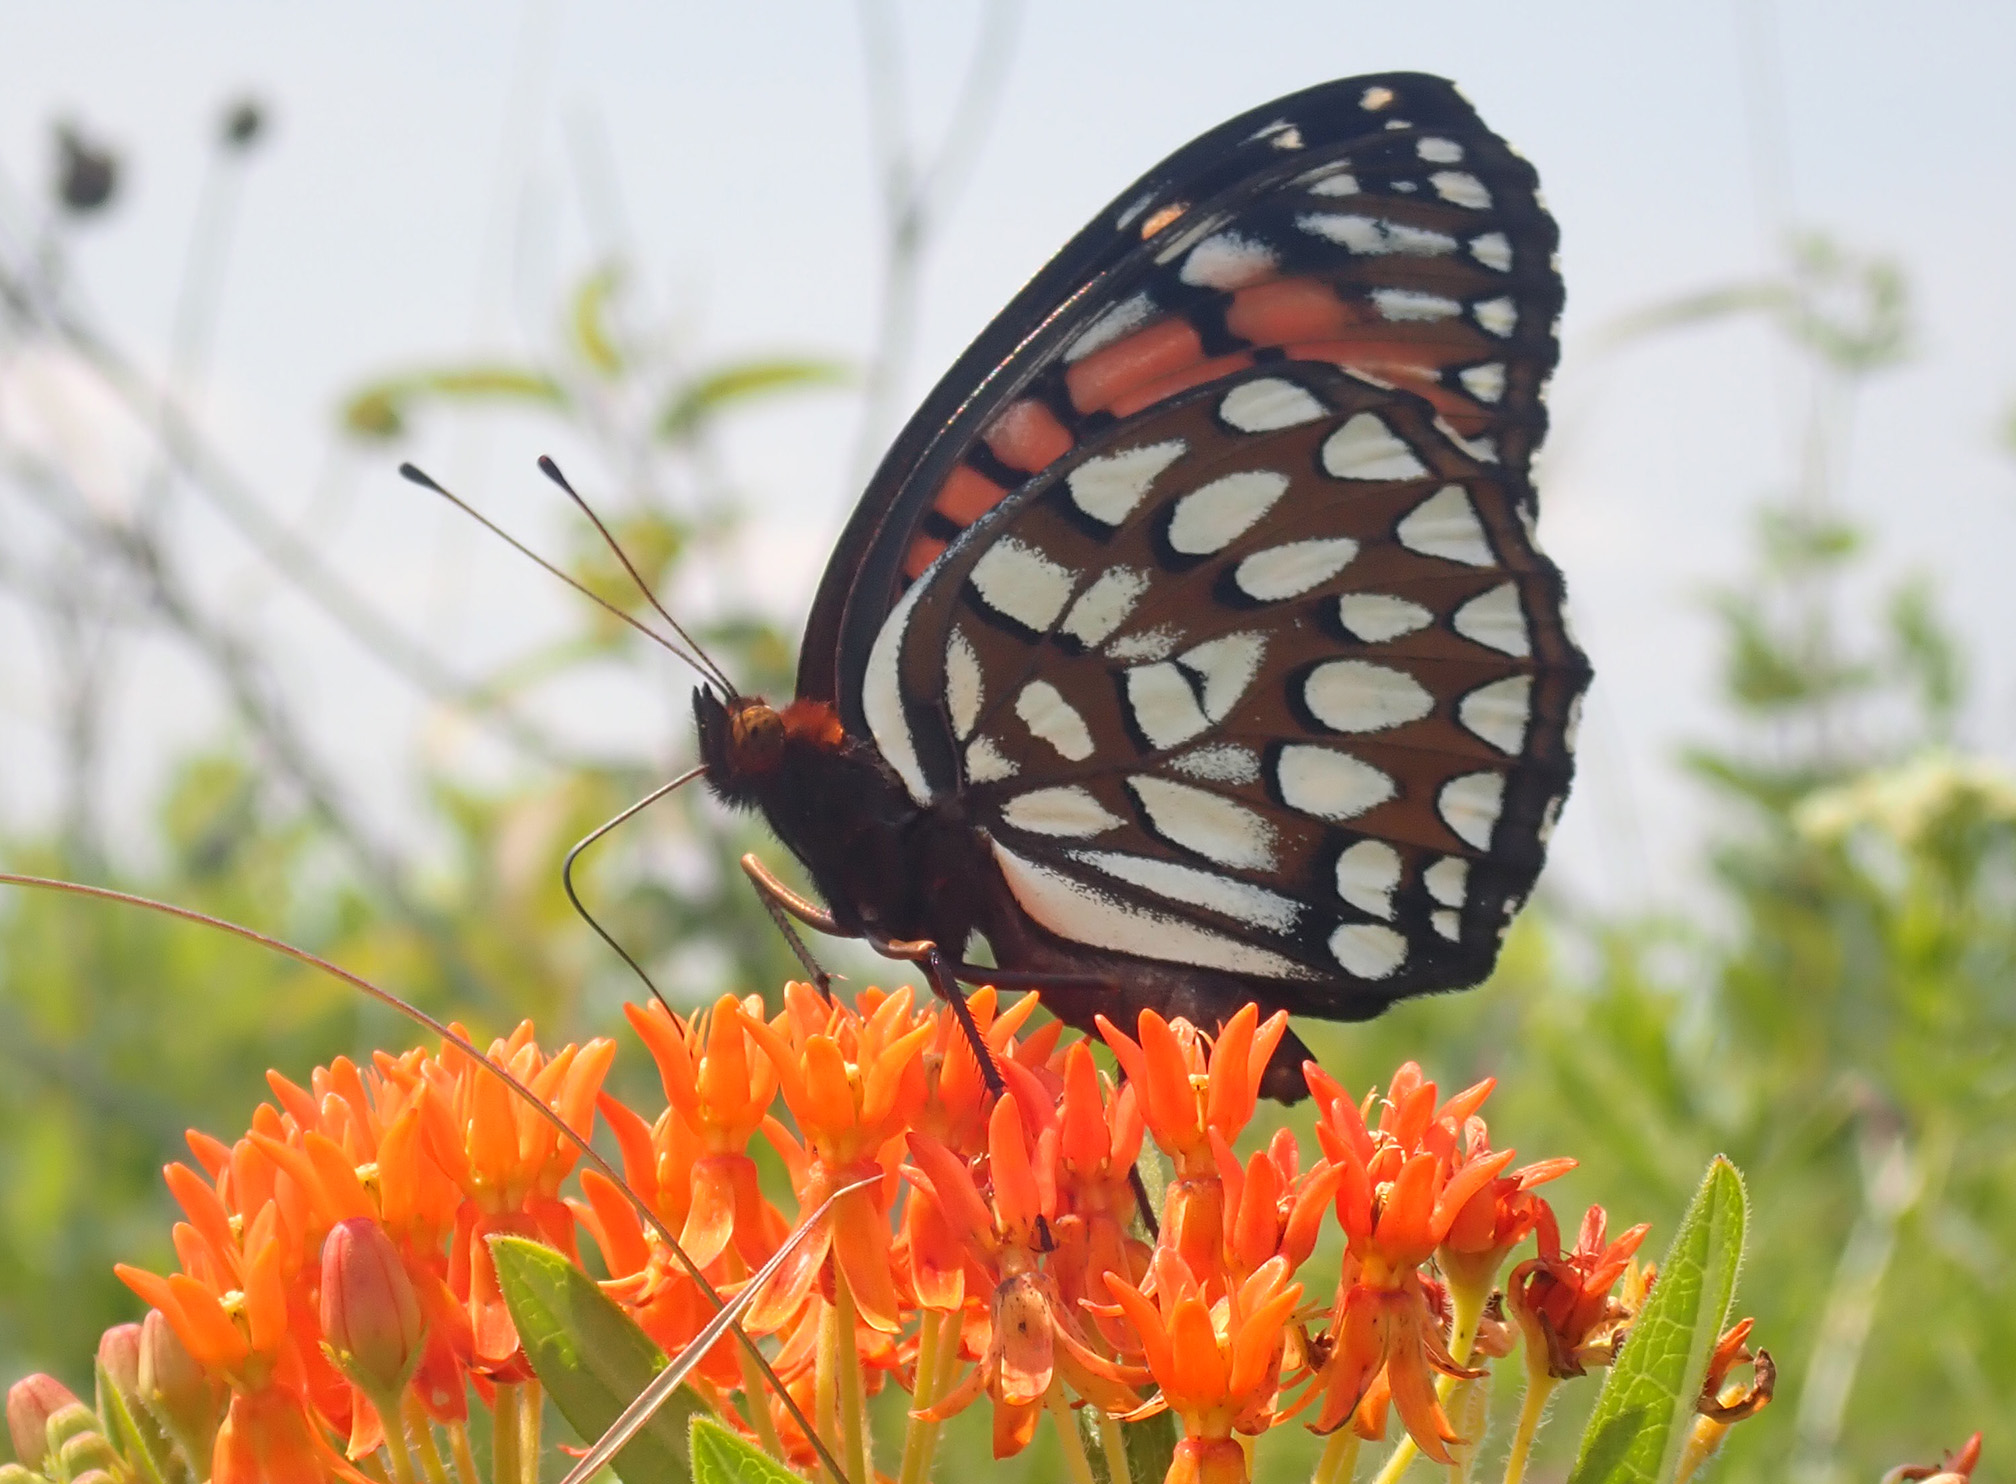 A butterfly rests on a flower with it’ wings held closed above its body. The wings are brown and covered with white patches. Some patches are triangular, some teardrop shaped, and others elongated. The flower is bright orange, and the butterfly has its tongue extended as it drinks nectar.